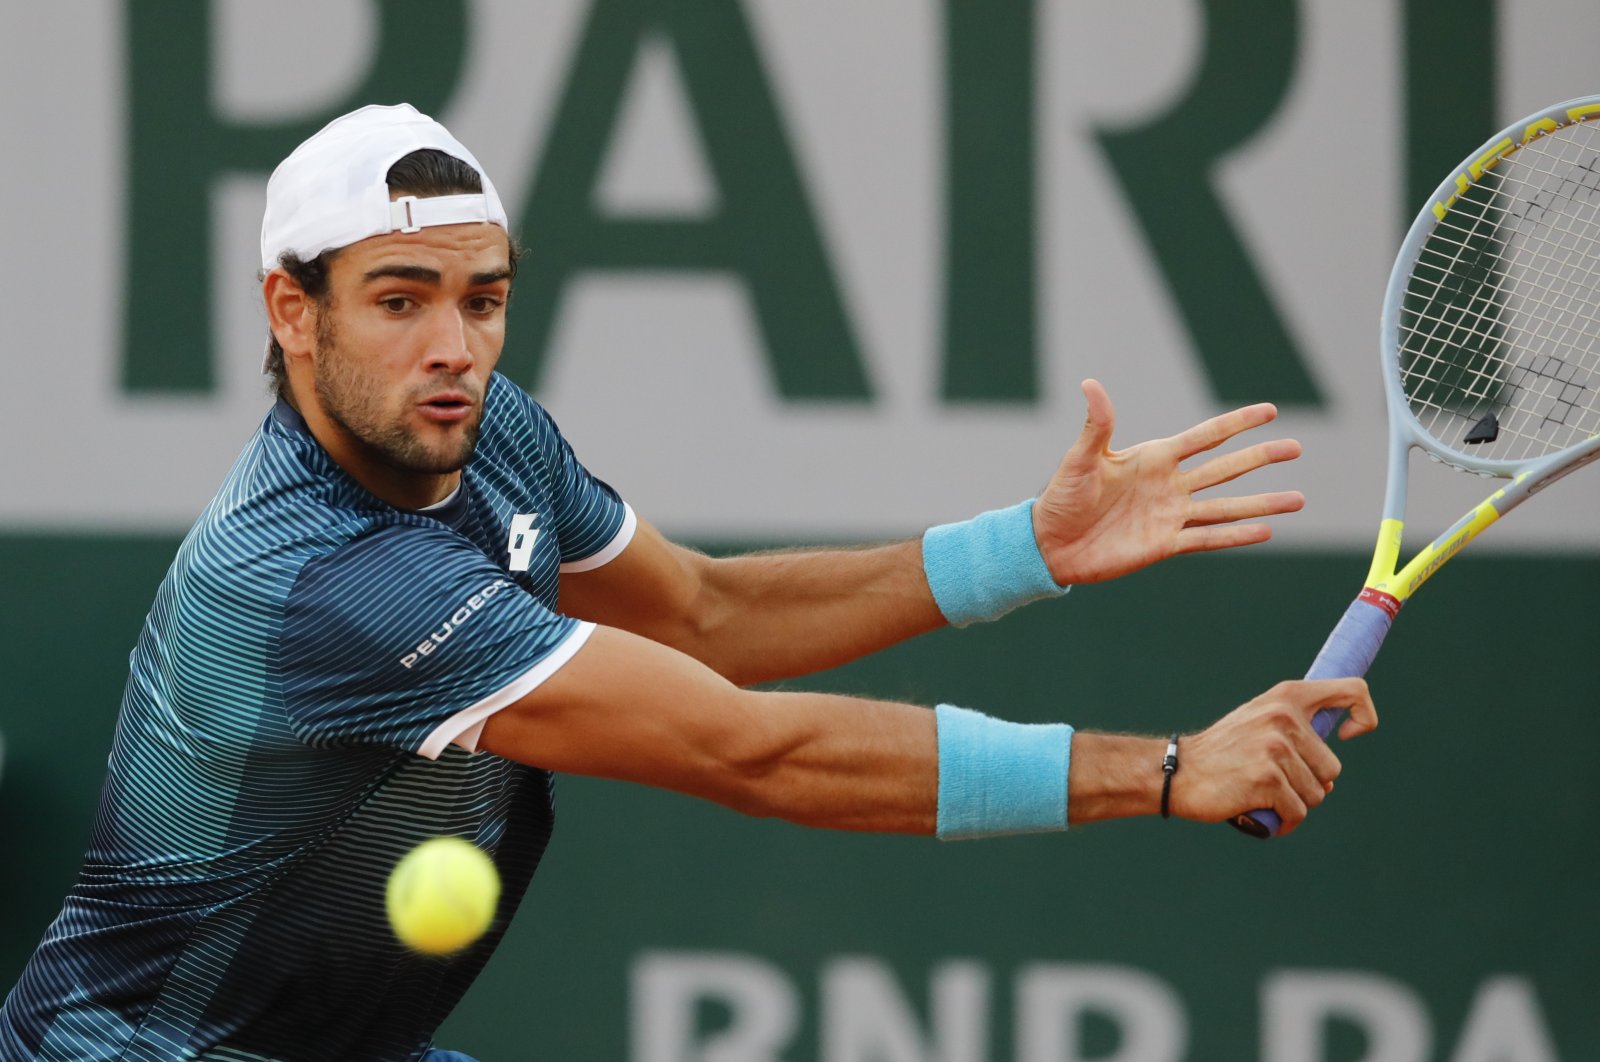 Matteo Berrettini plays a shot against Lloyd Harris during a French Open match at the Roland Garros stadium in Paris, France, Oct. 1, 2020. (AP Photo)